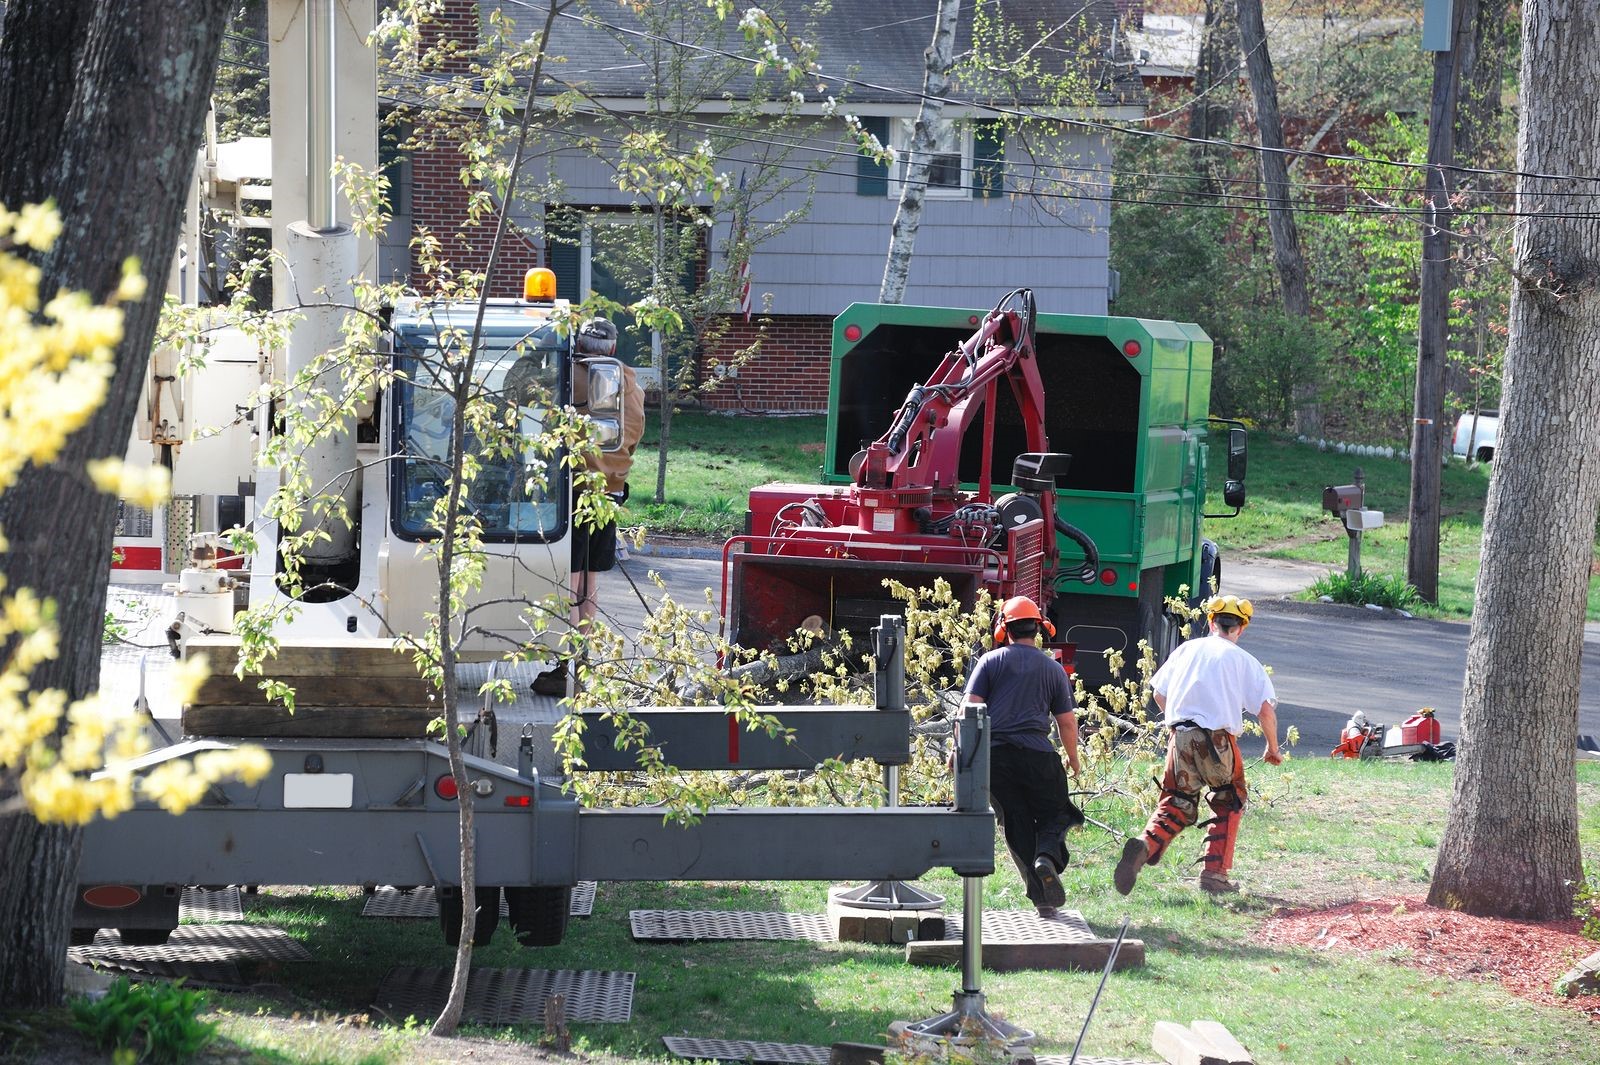 Tree Removal at the Appropriate Time Increases Homeowner Satisfaction